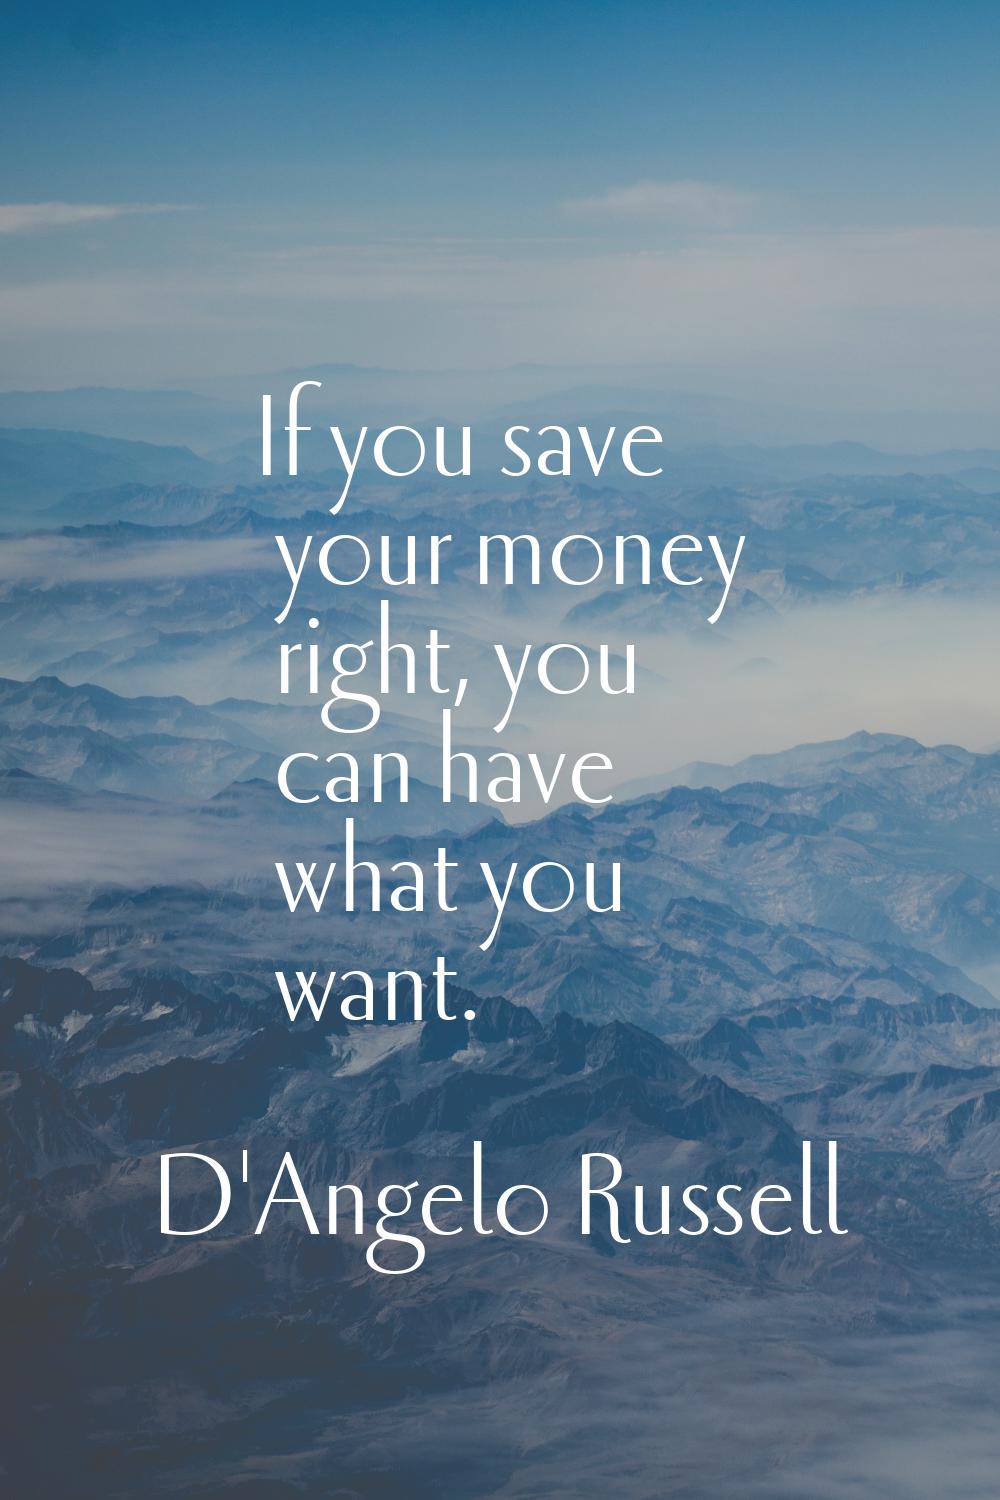 If you save your money right, you can have what you want.